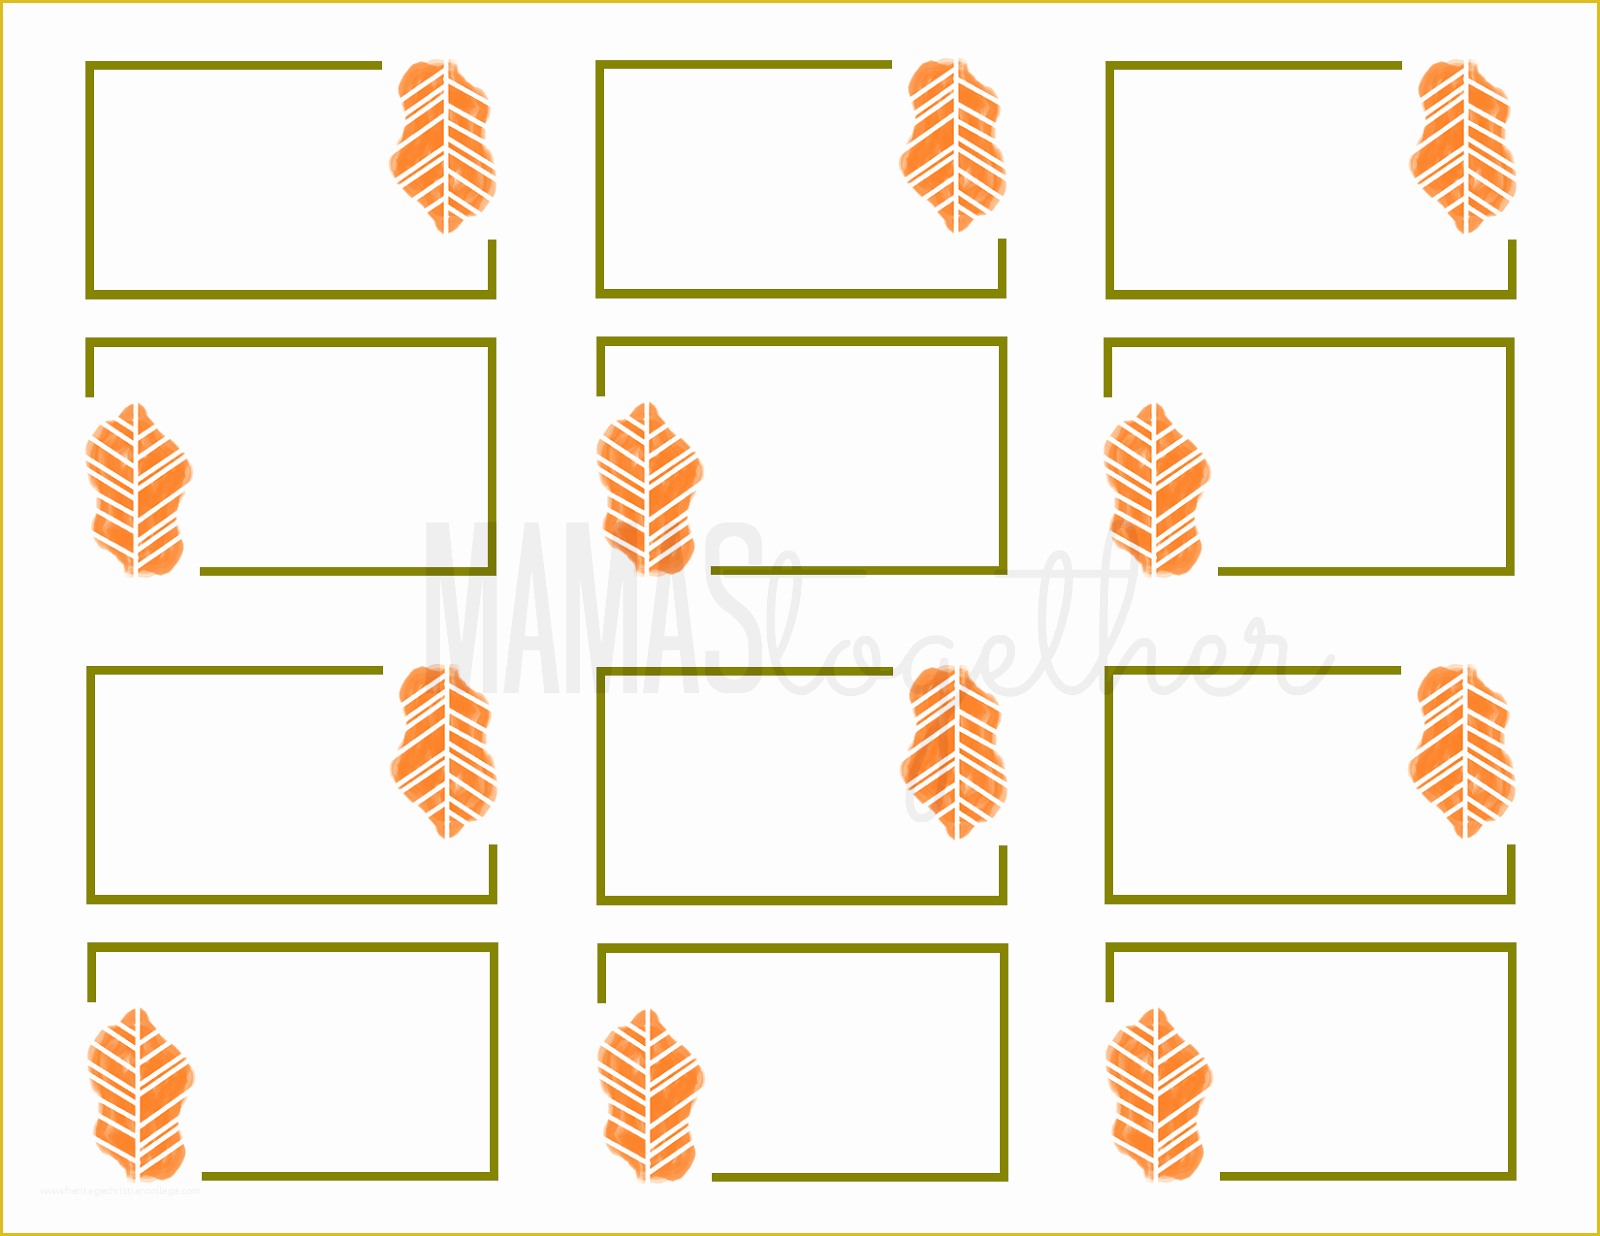 Free Place Card Template Of Free Printable Table Tent Card Template